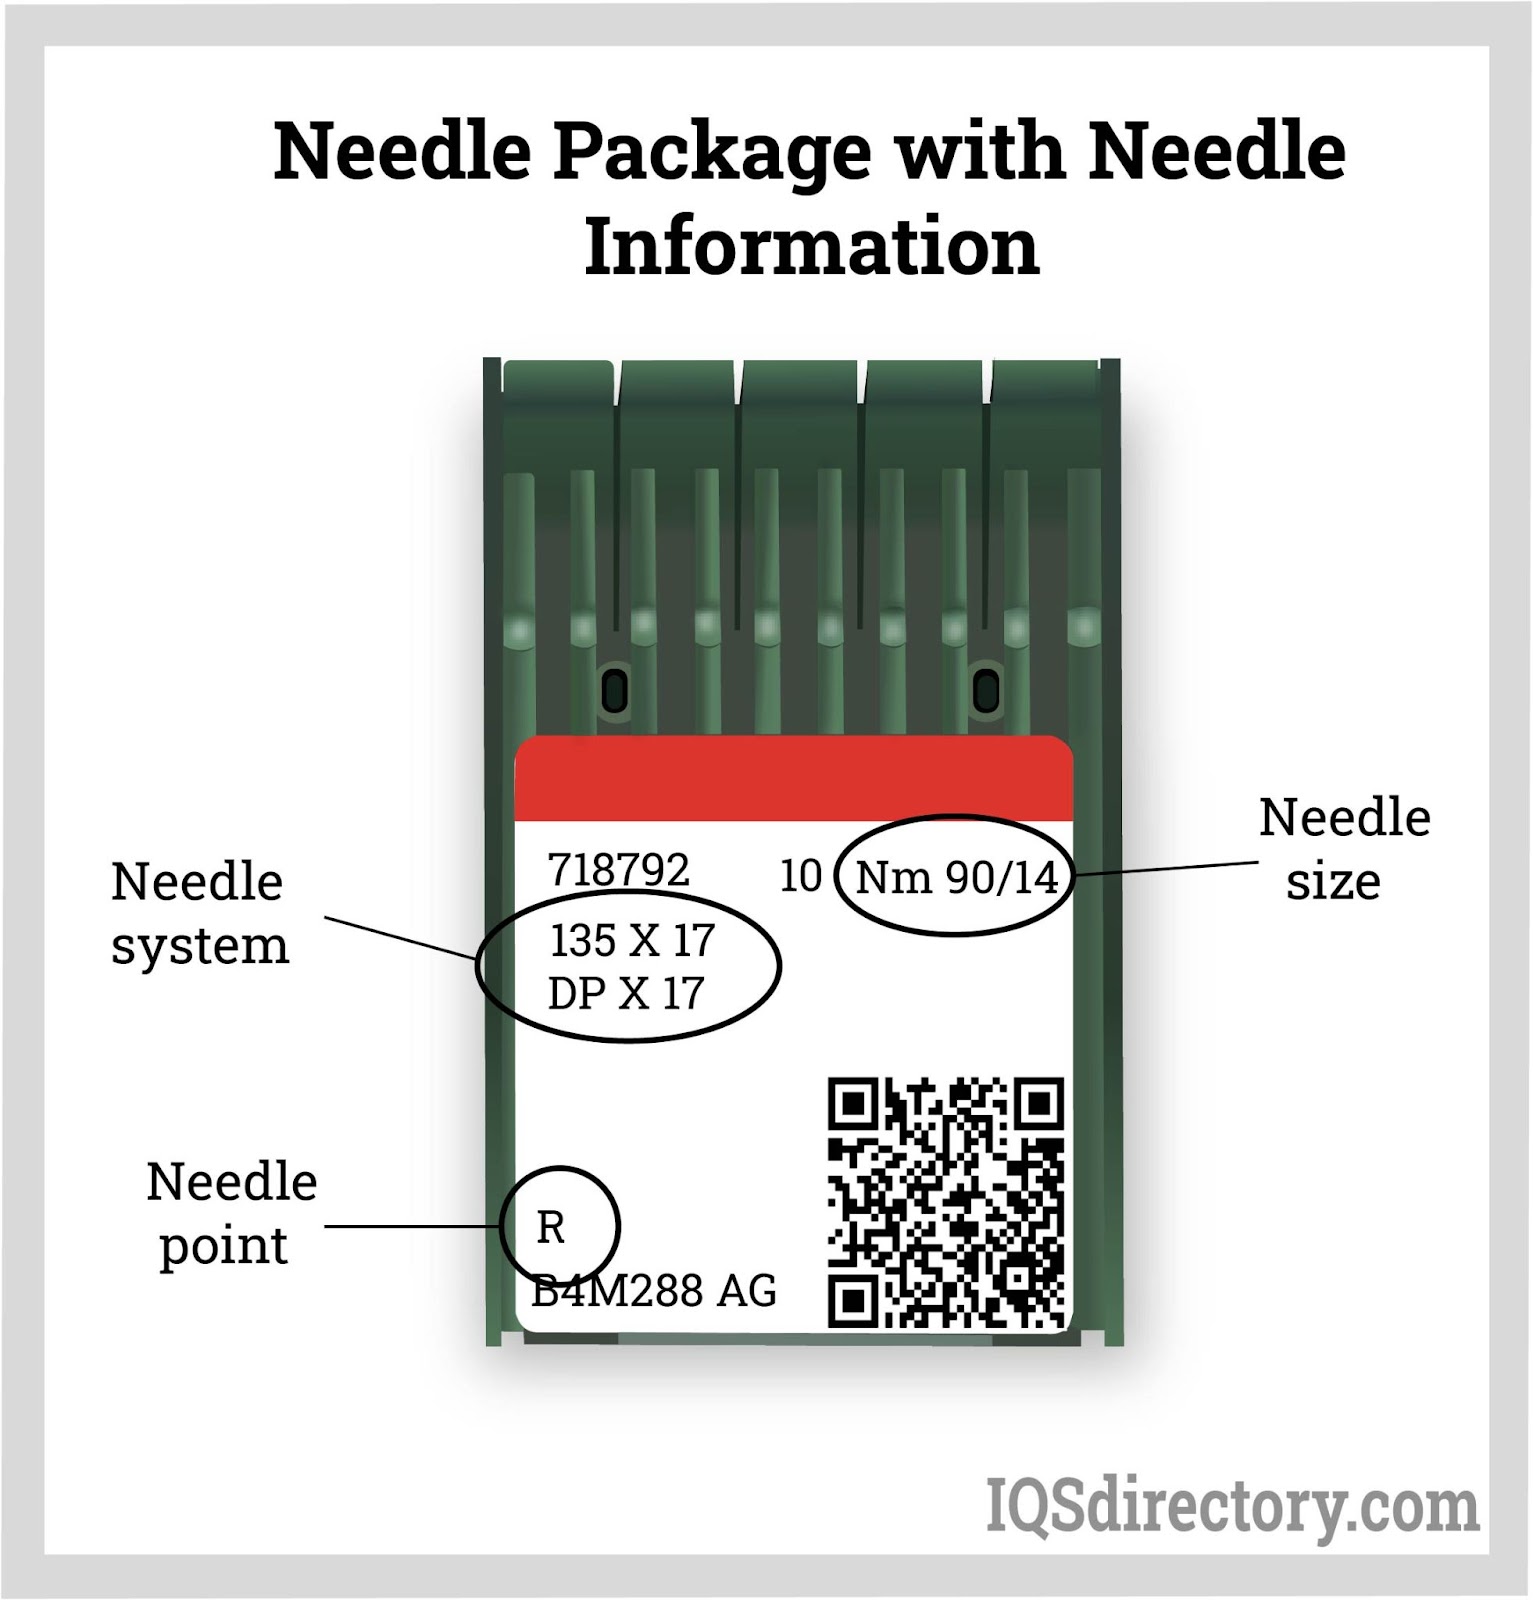 Needle Package with Needle Information